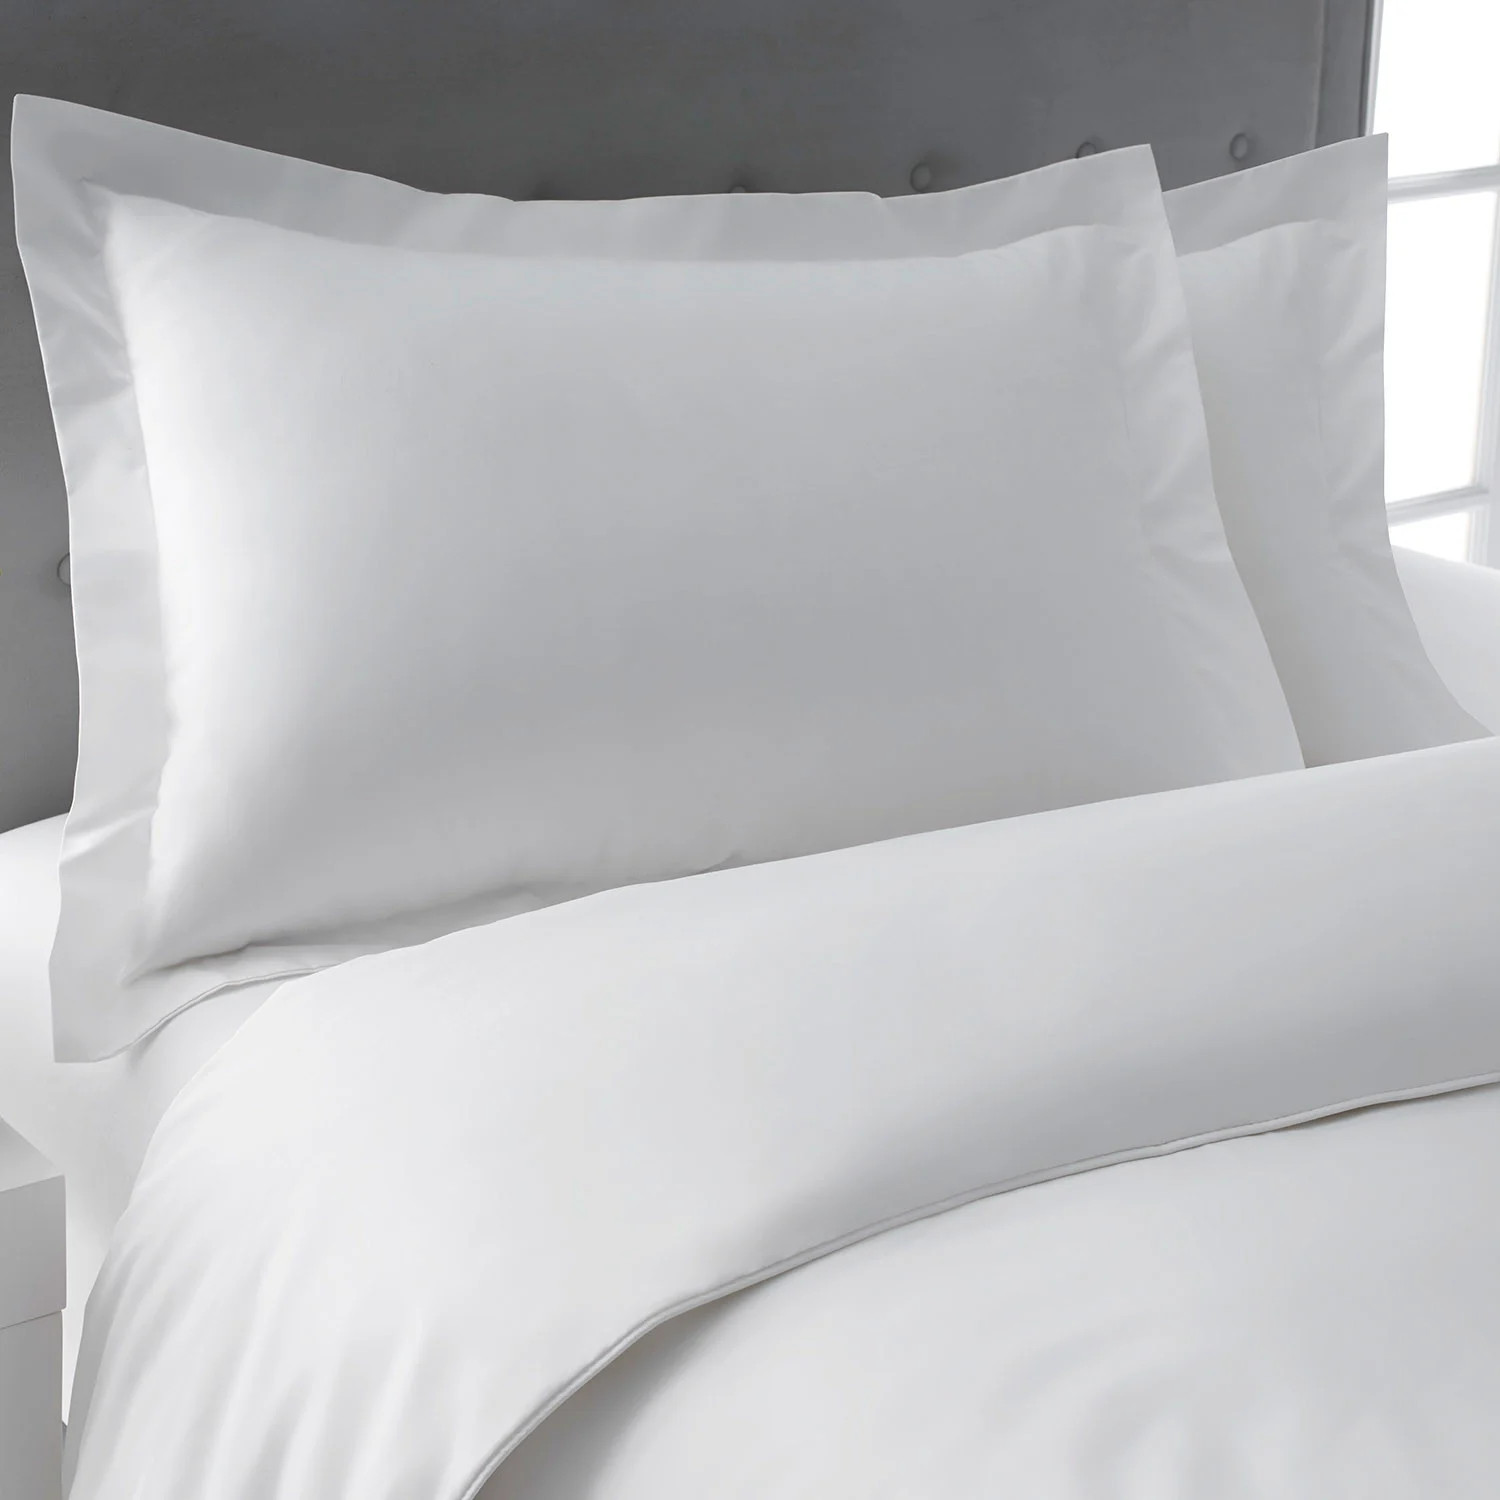 Martex Millennium T200 Fresh White Sheets-Twin Fitted